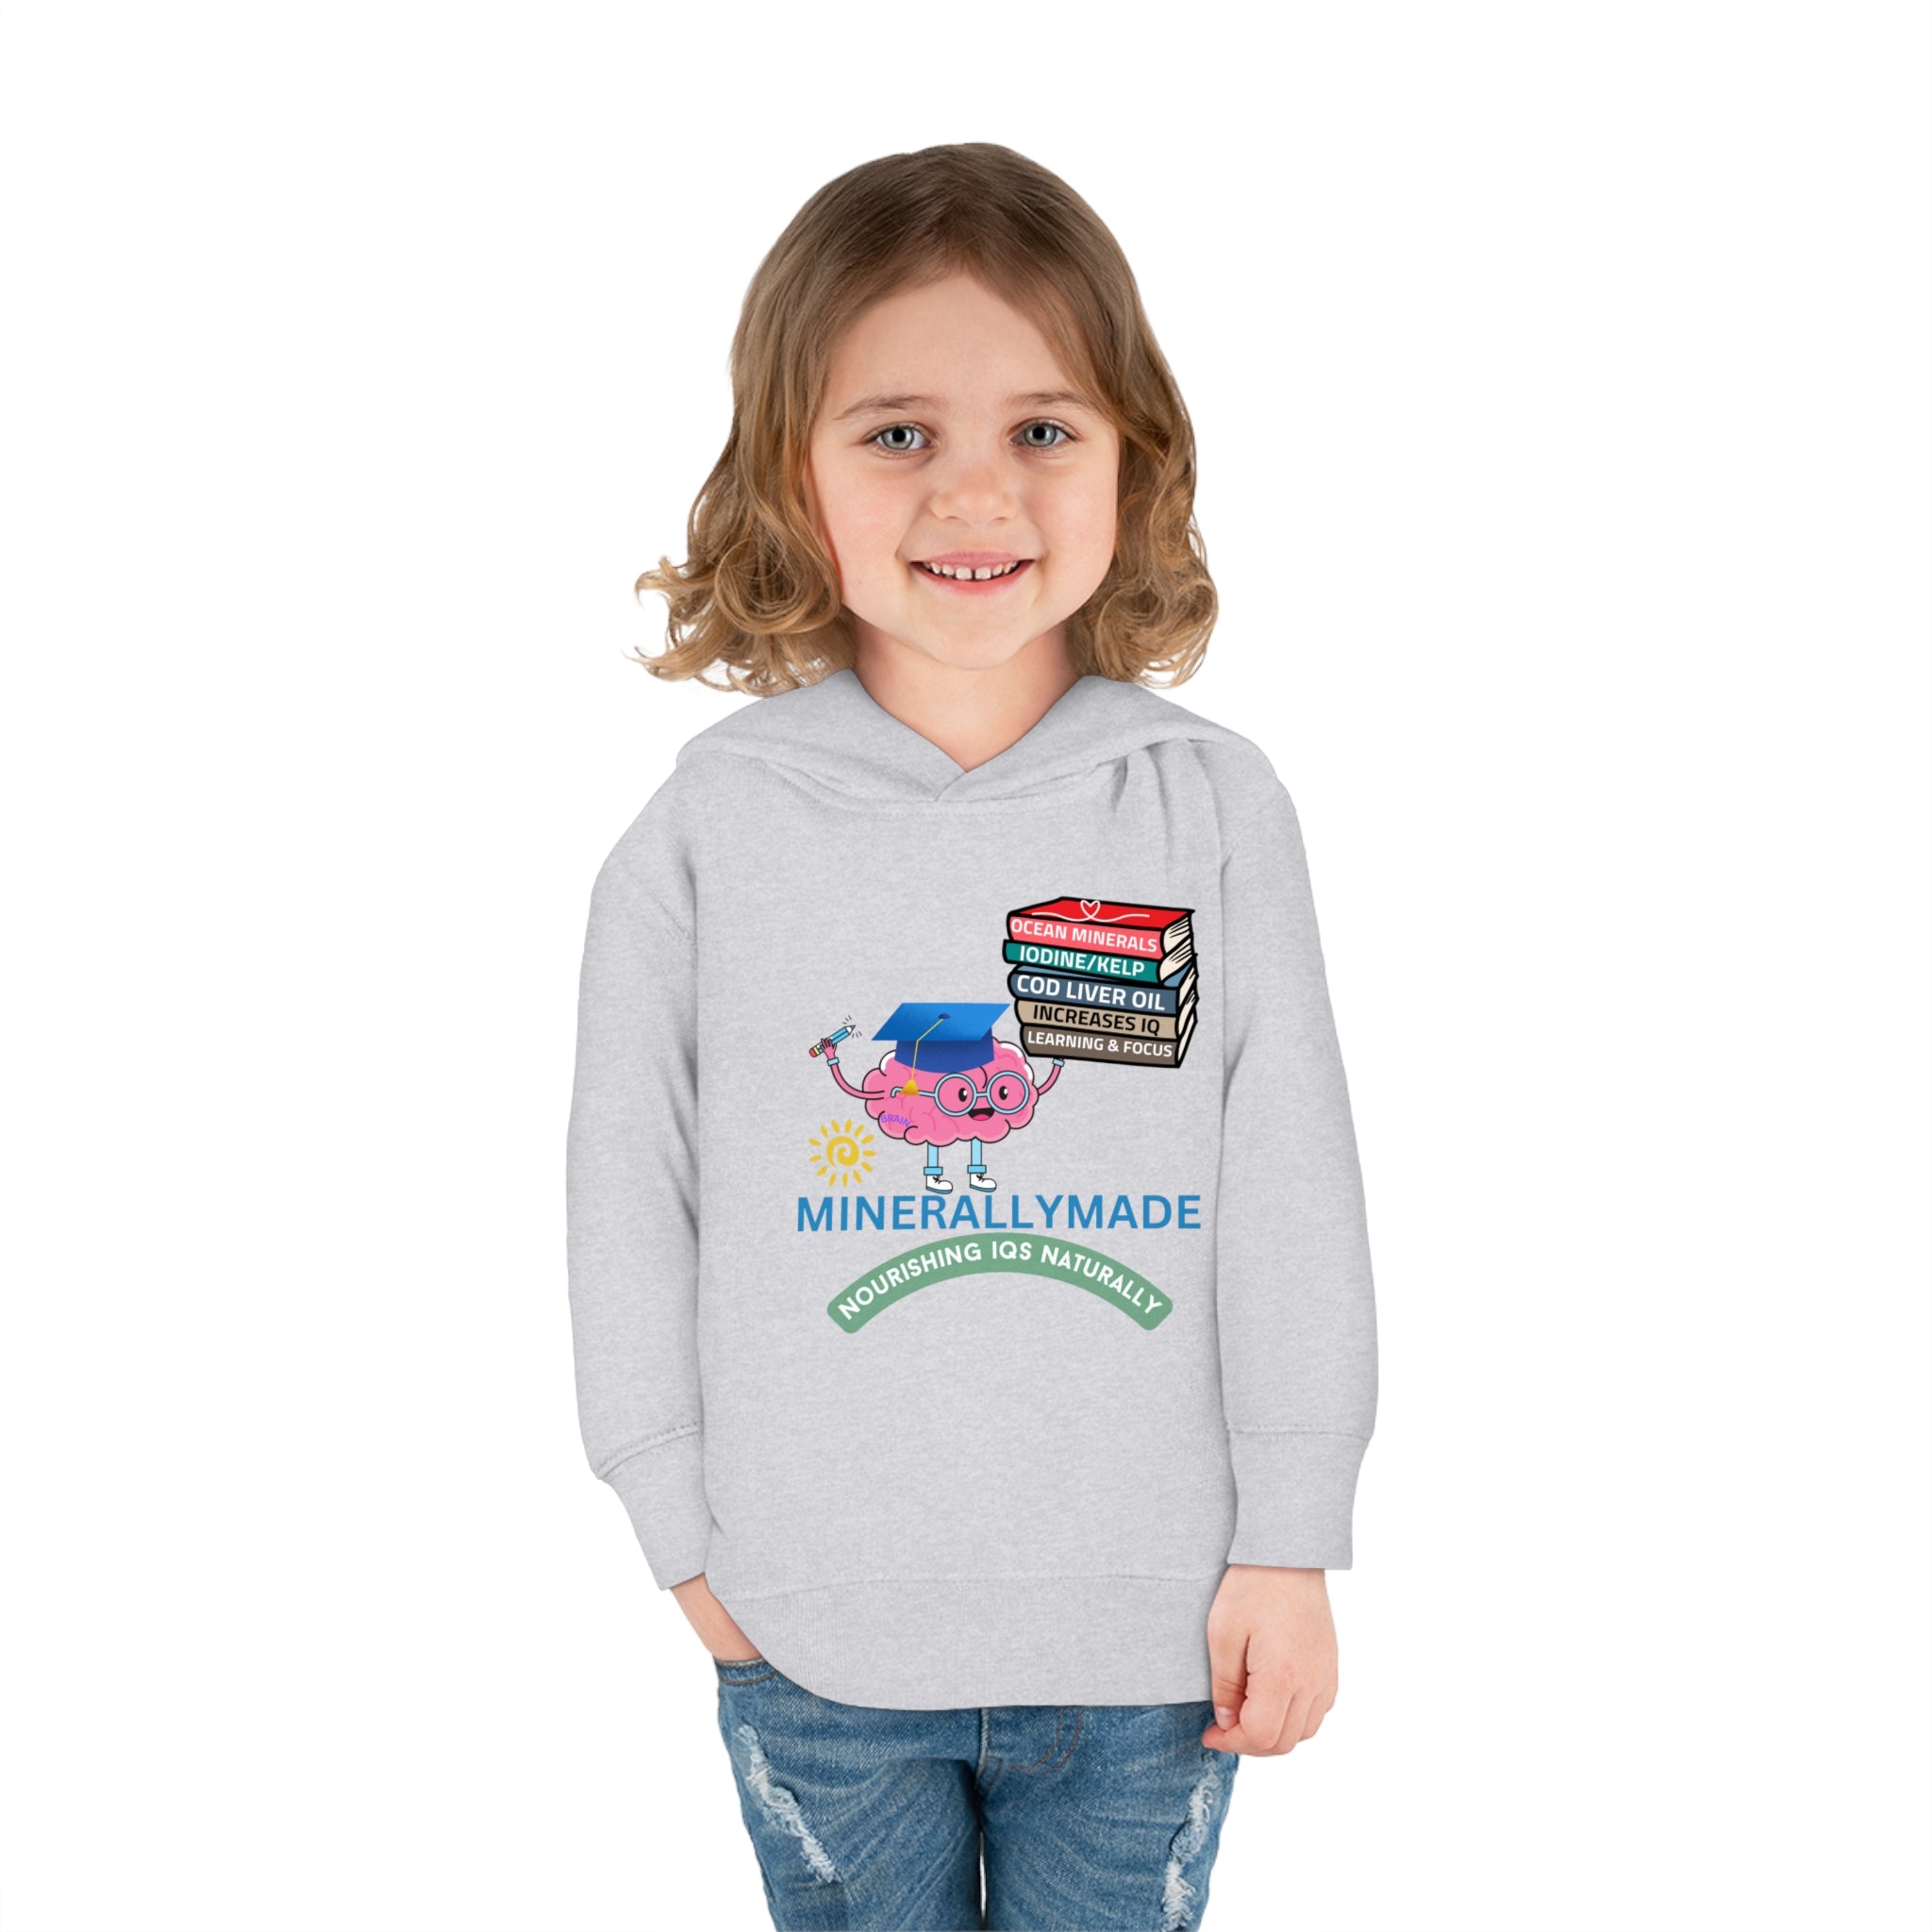 Minerallymade | Nourishing IQs Naturally | Toddler Pullover Fleece Hoodie